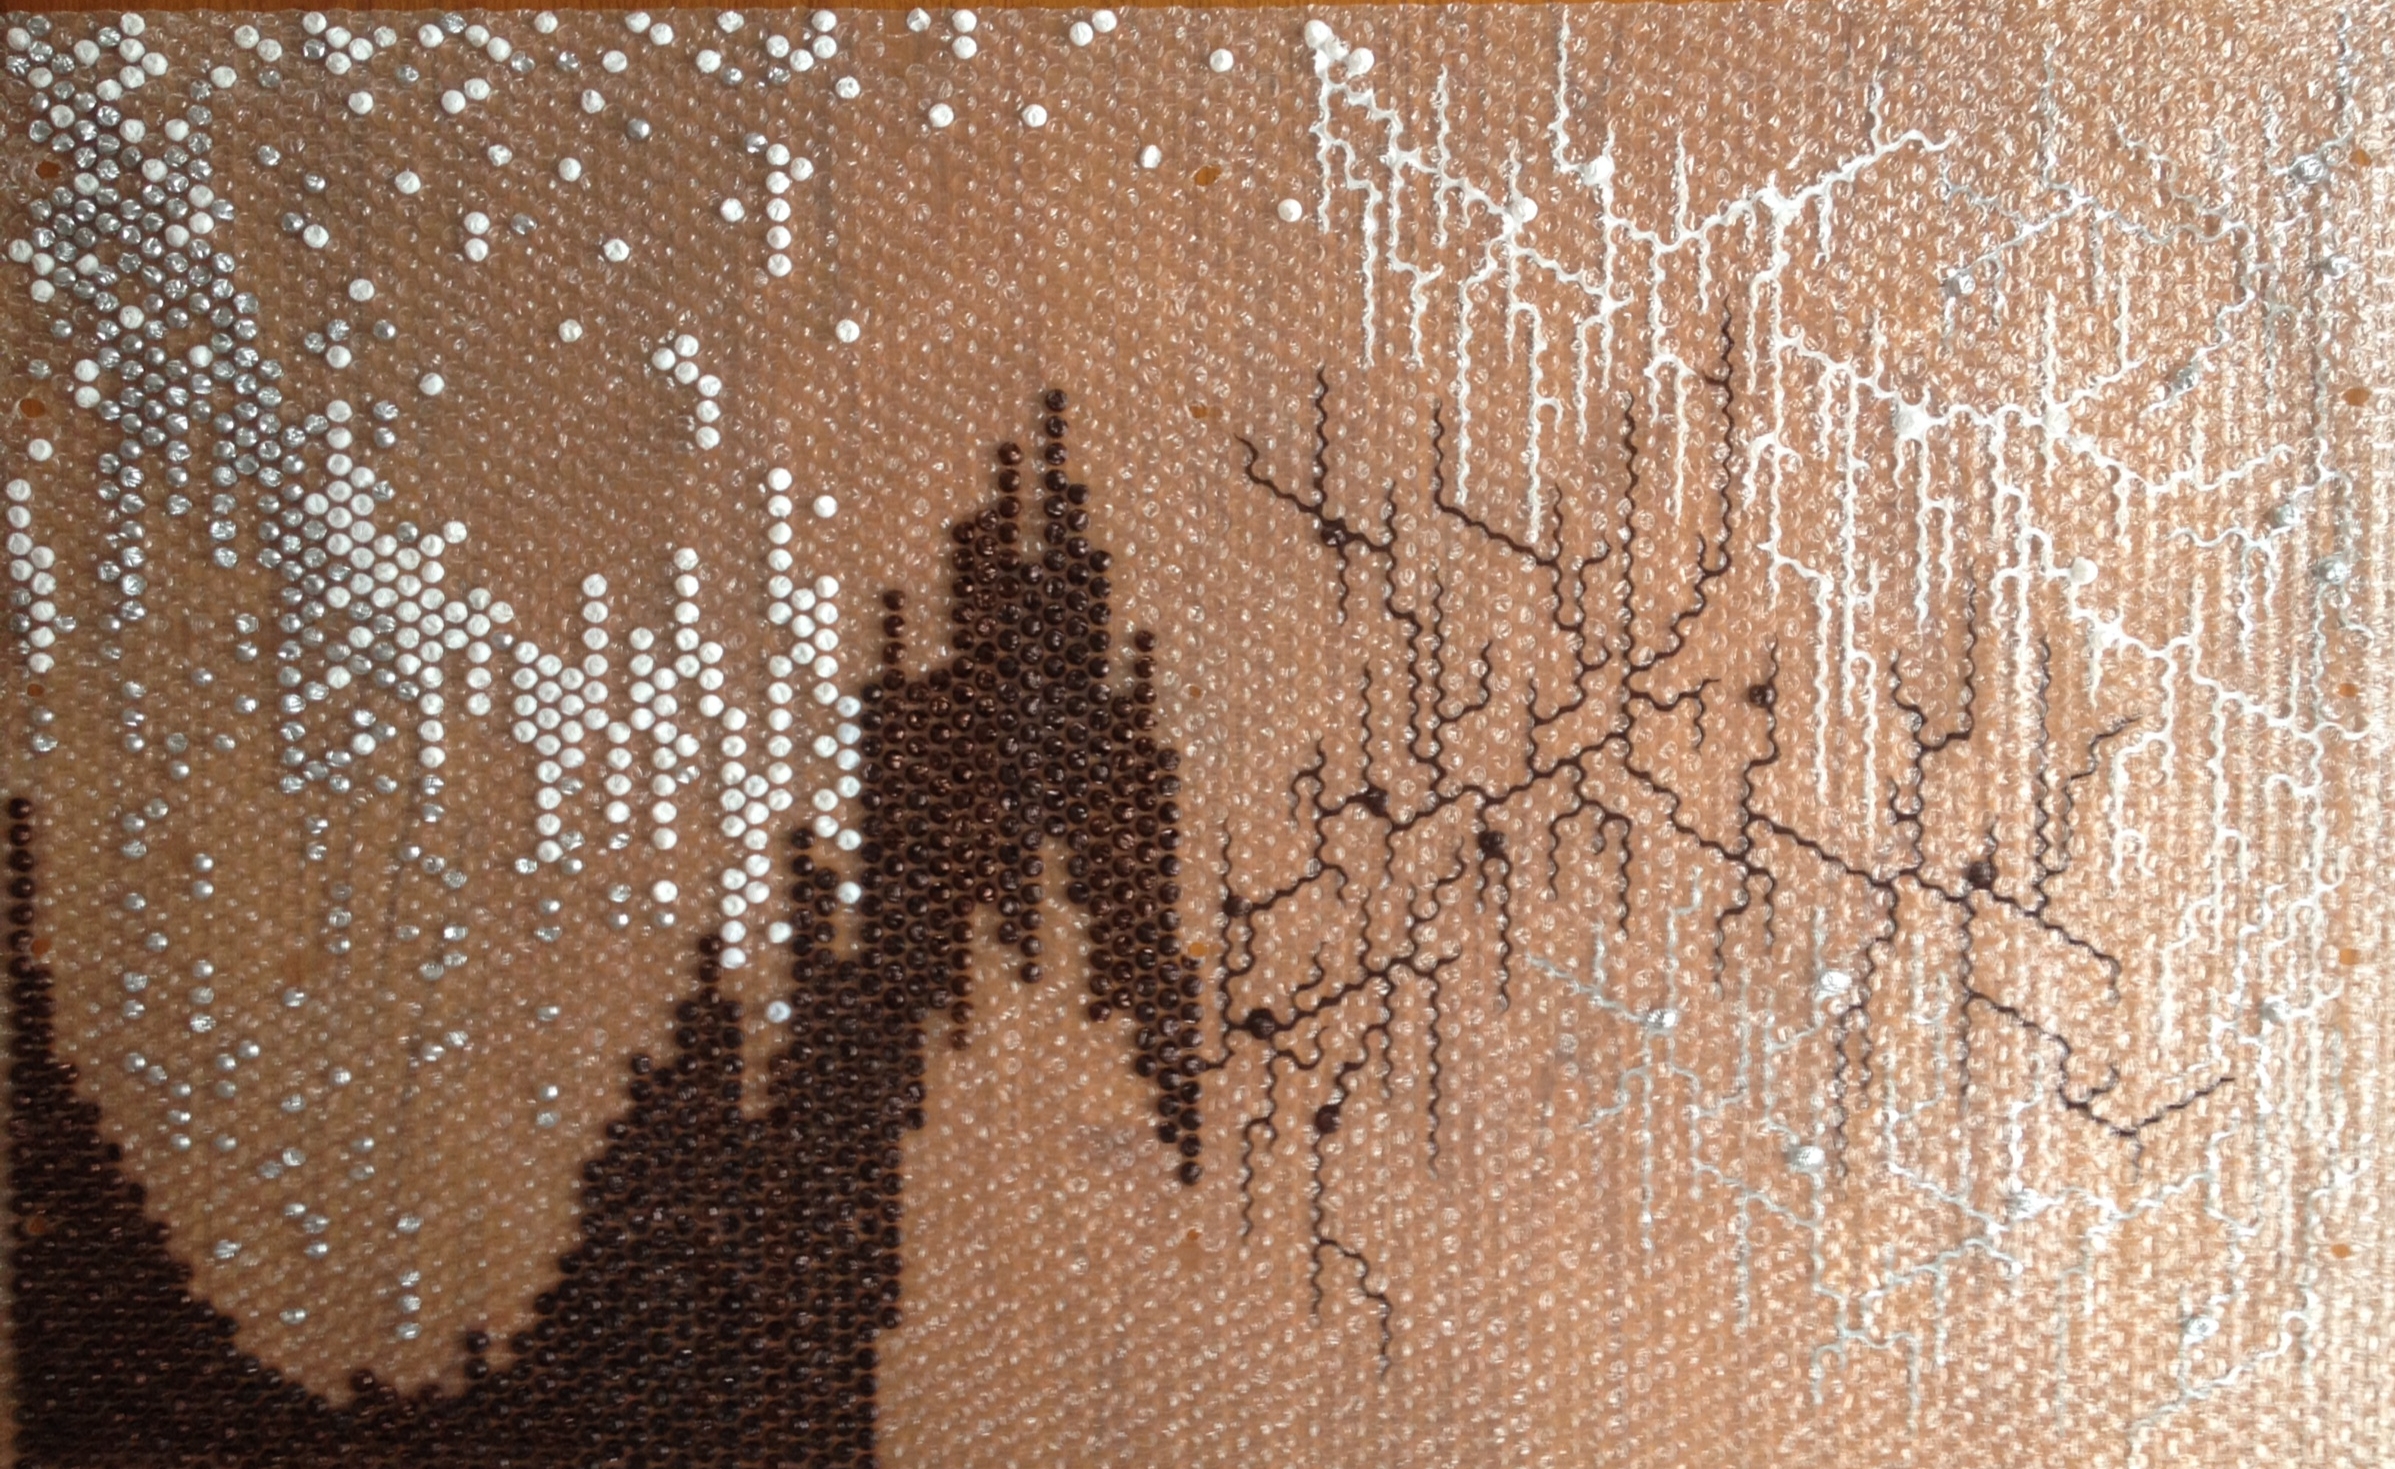 "On to Off", permanent markers on bubble wrap, 36" X 48"